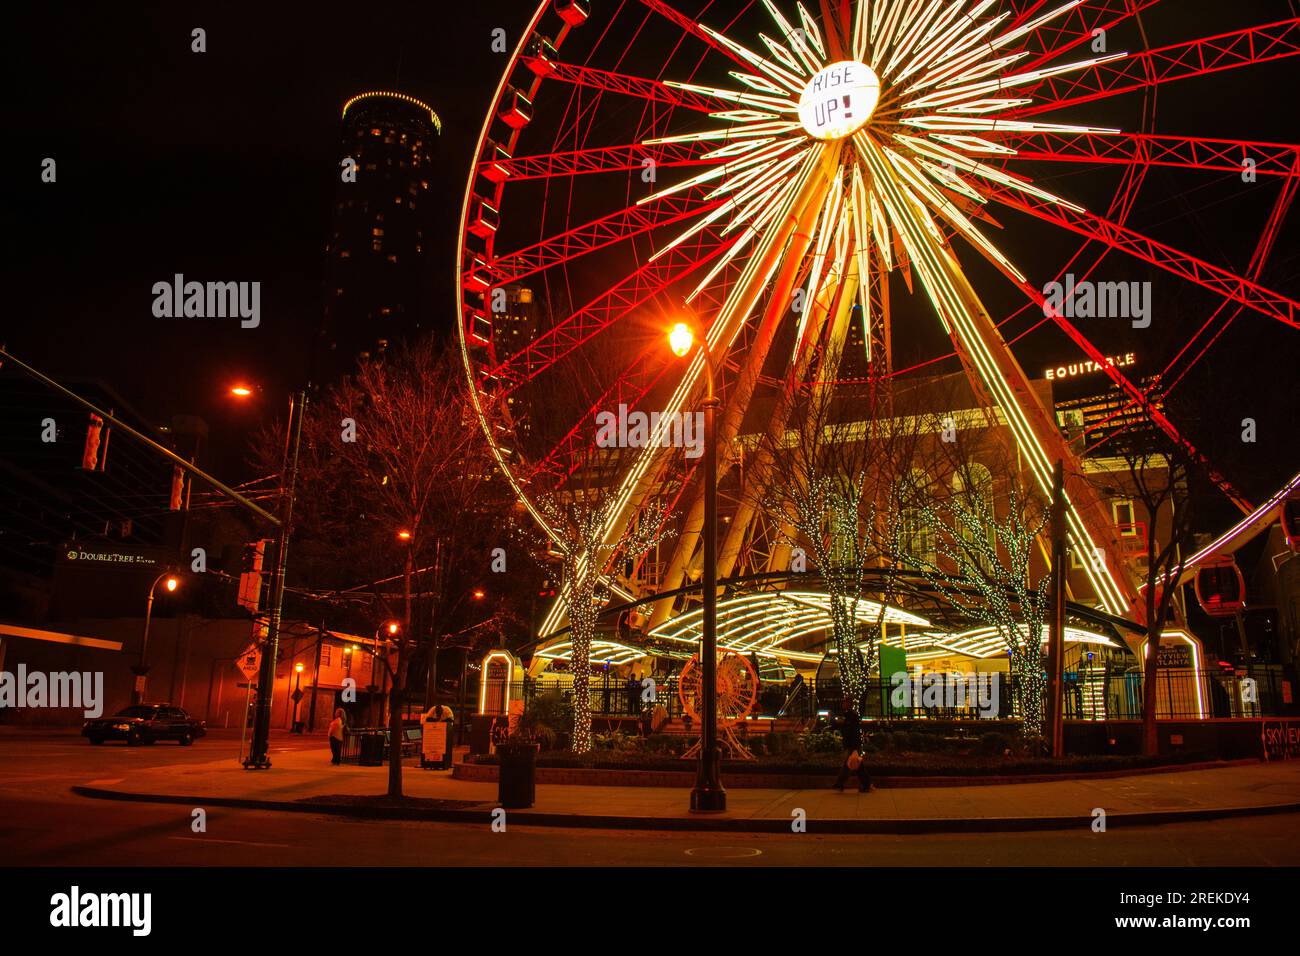 The SkyView Atlanta Ferris wheel stands out in the vibrant downtown Atlanta night. Stock Photo